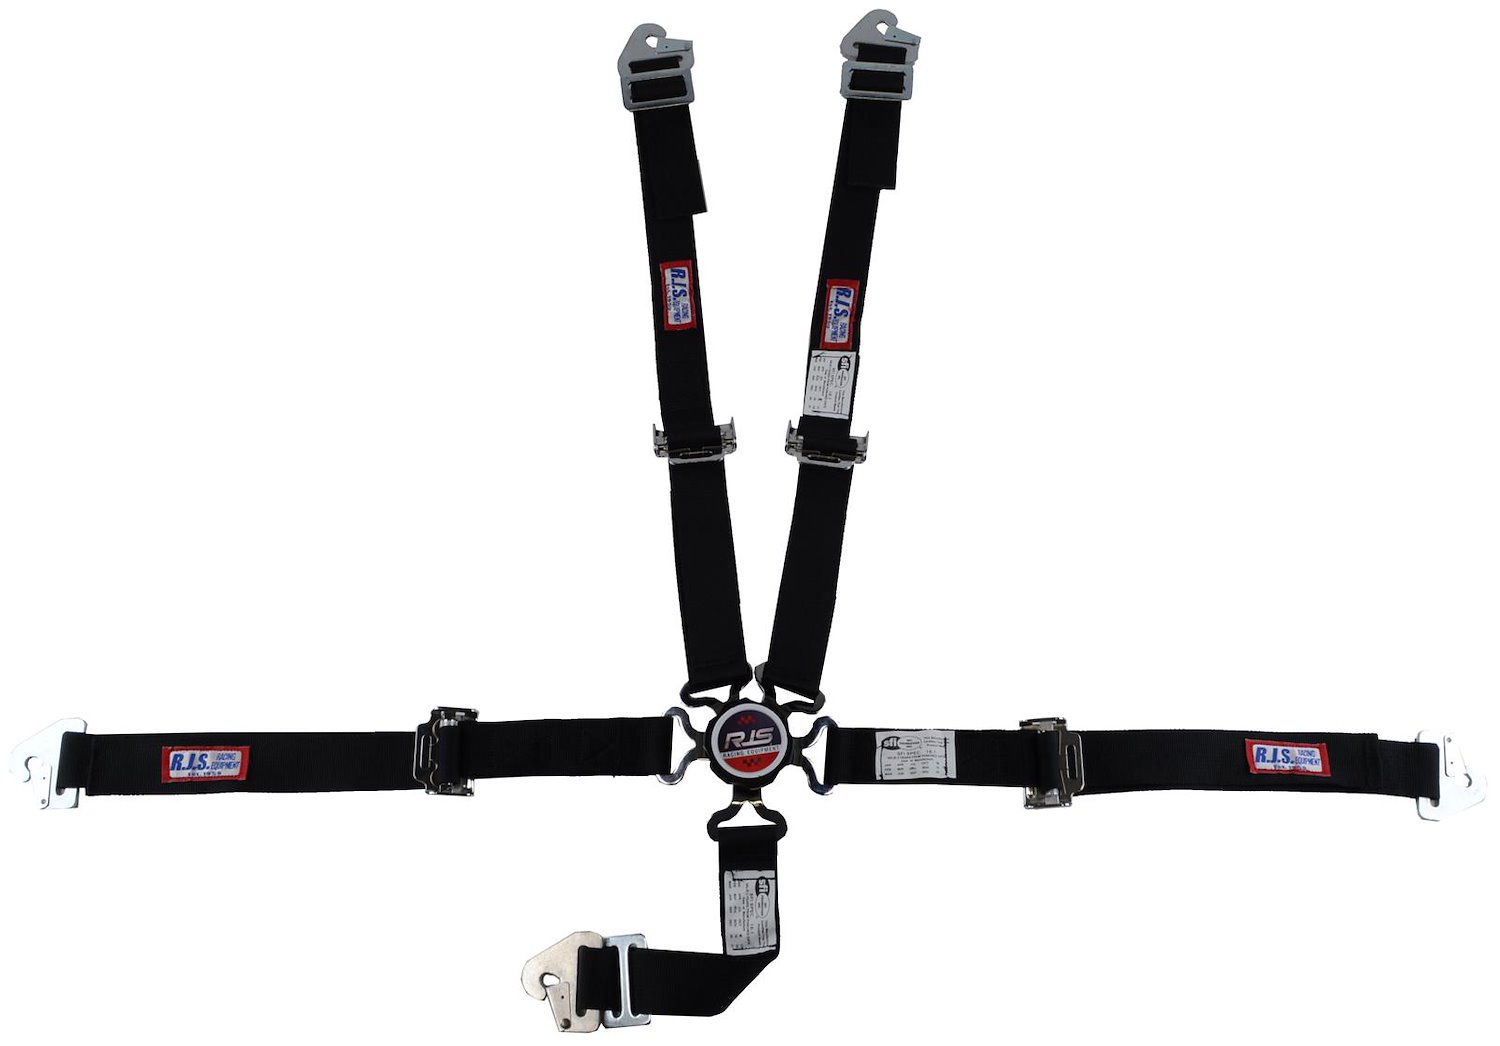 SFI 16.1 CAM-LOCK HARNESS 2 PULL UP Lap Belt 2 Shoulder Harness V ROLL BAR Mount 2 DOUBLE Sub ALL SNAP ENDS RED